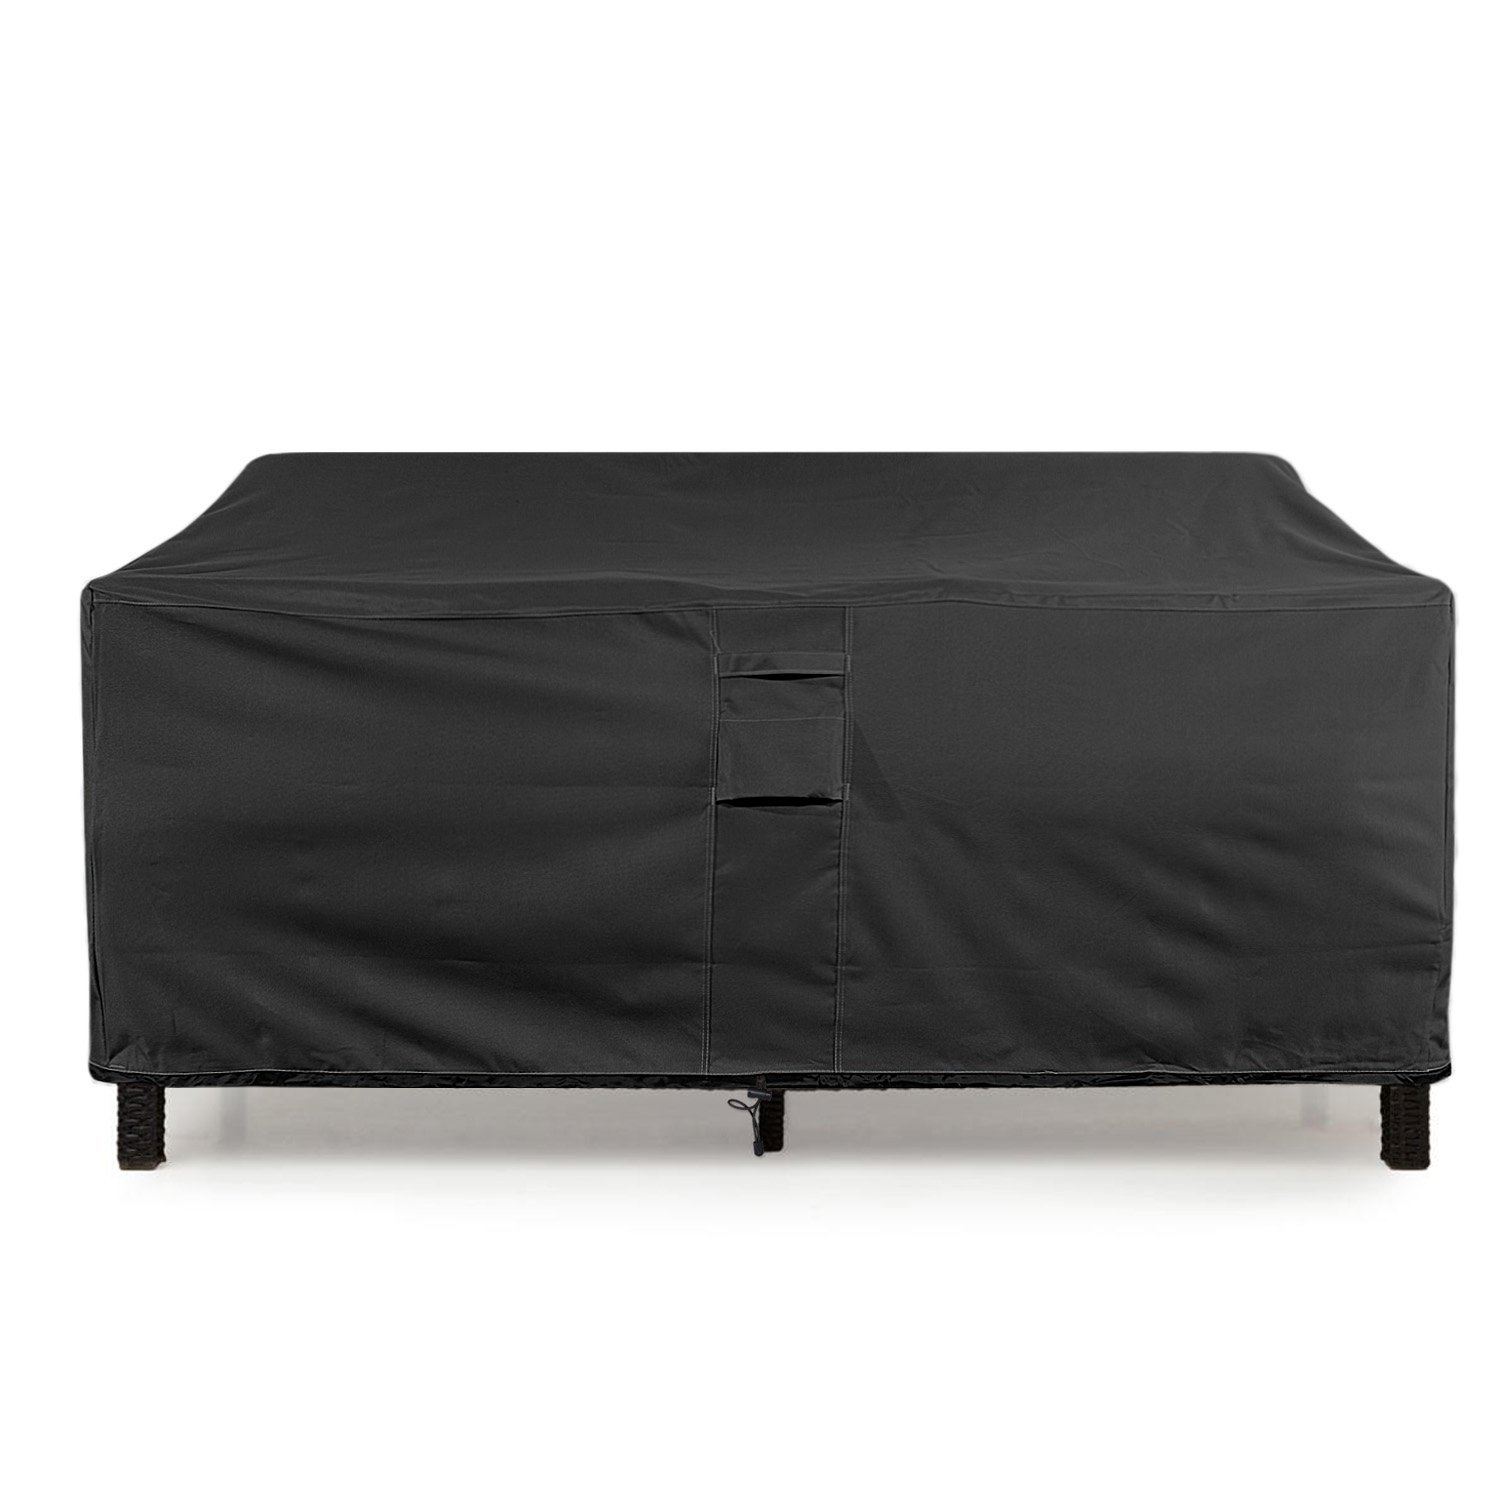 Outdoor Sofa Cover 88" x 32" x 33" Weatherproof Loveseat Outdoor Couch Patio Furniture Protector Large - Black - image 1 of 5